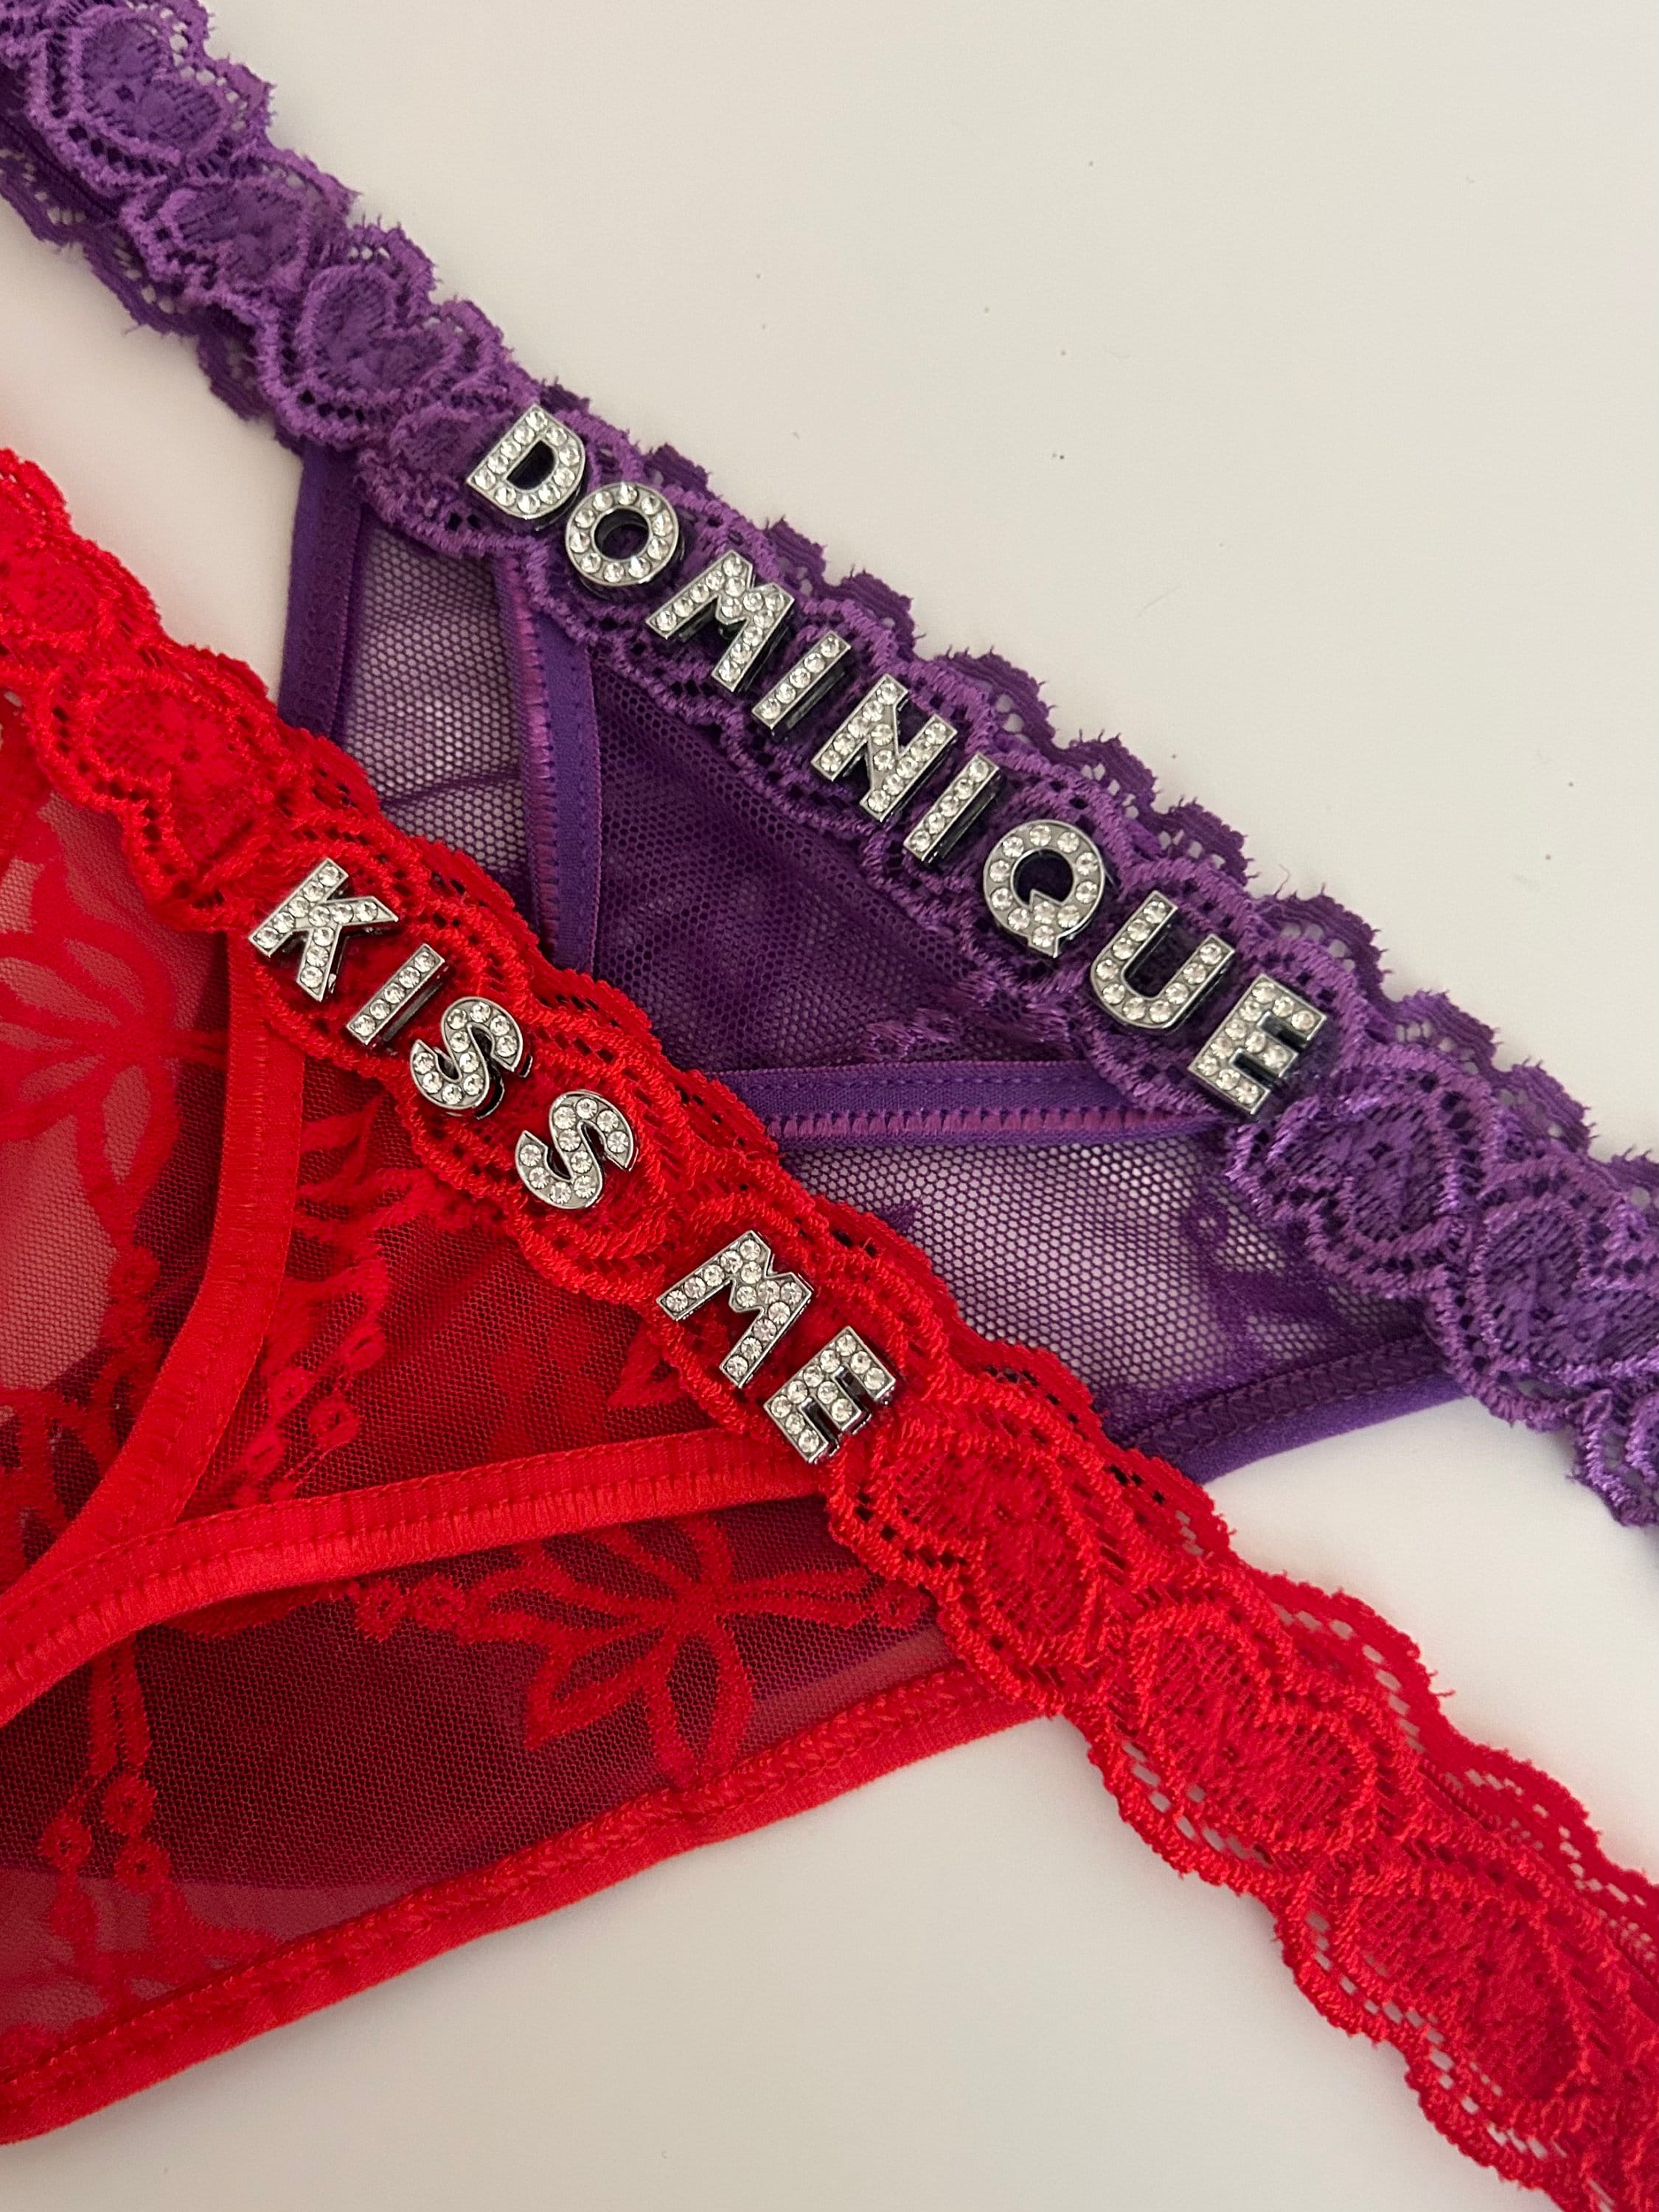 Personalized Name Thong: A Unique Intimate Gift